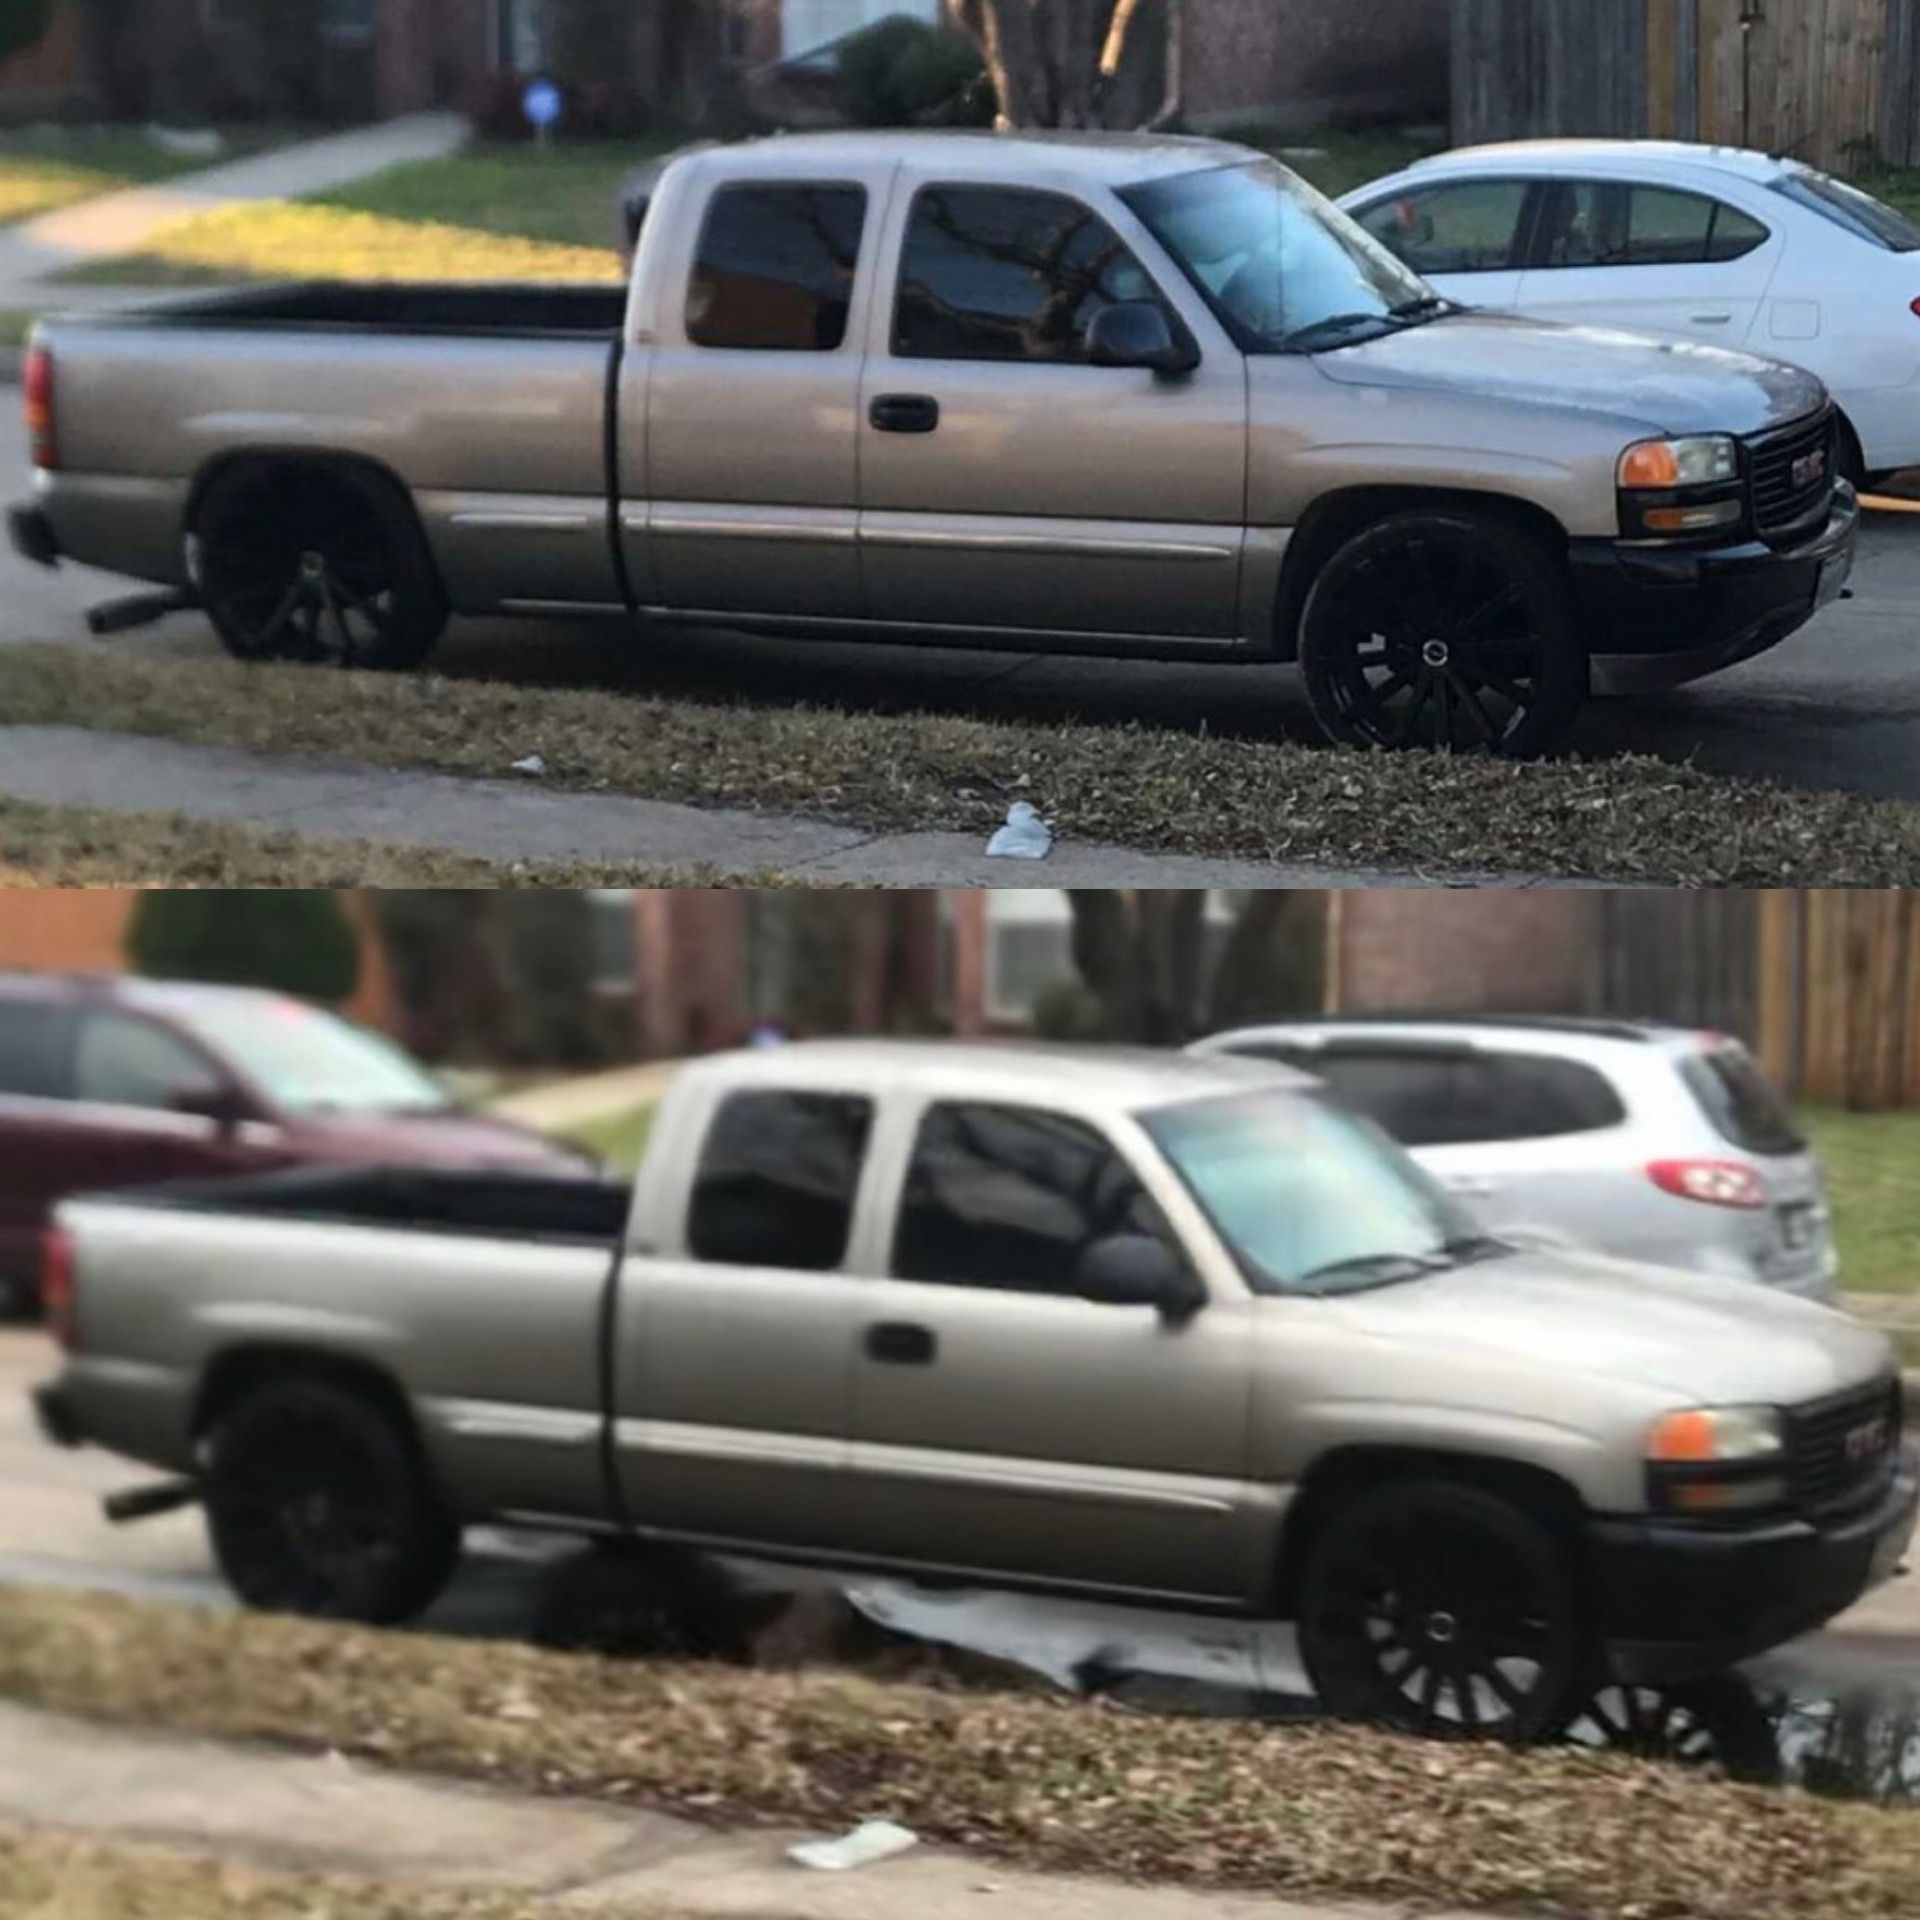 Truck drops and notches